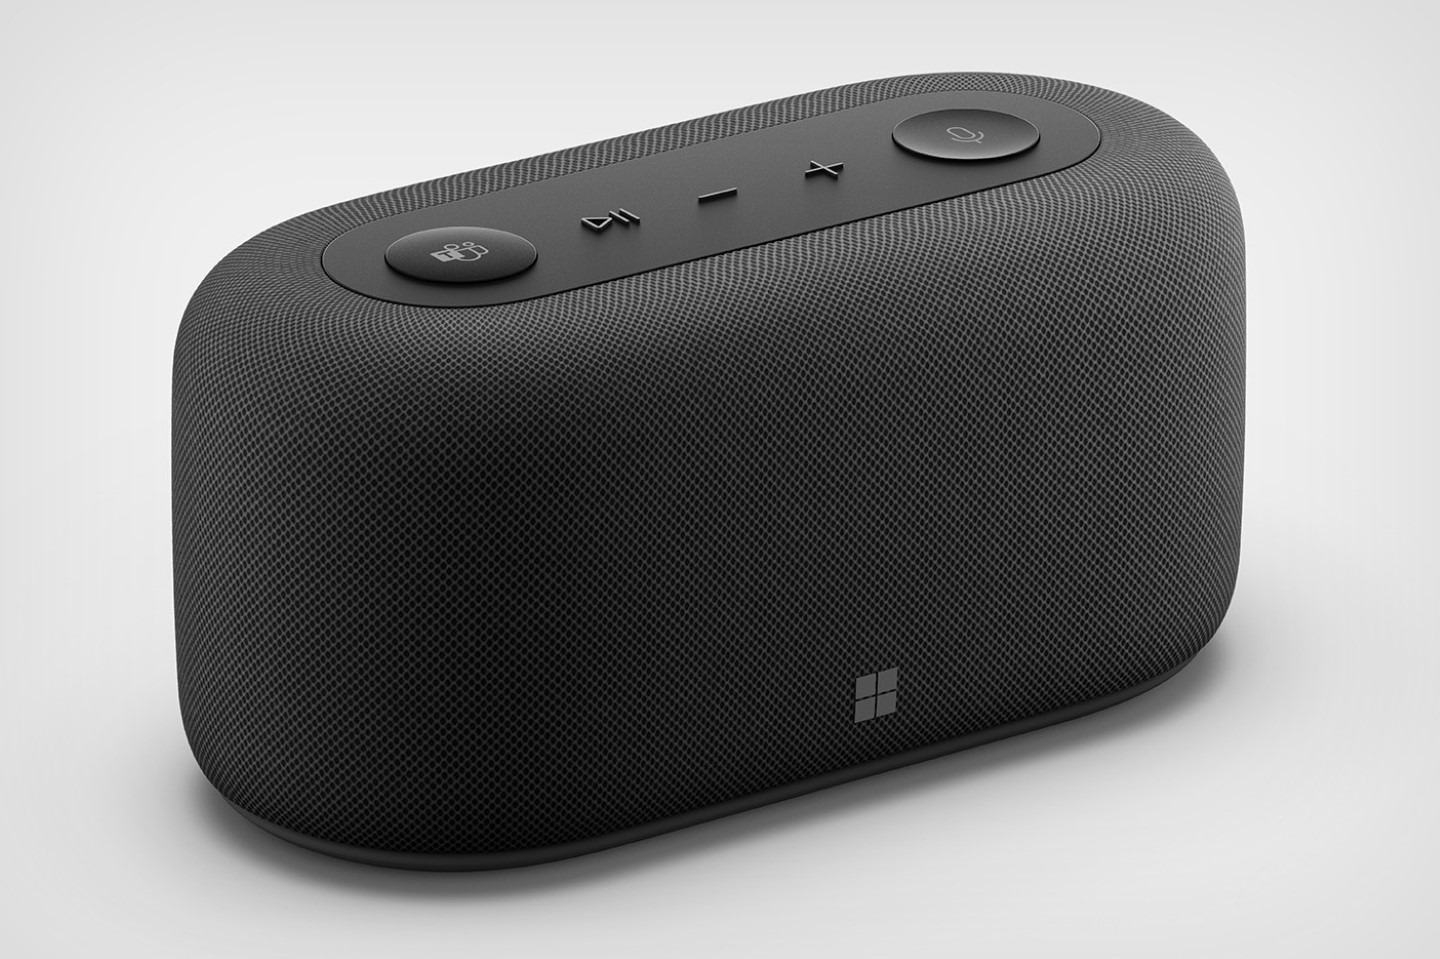 #The Microsoft Audio Dock gives you a versatile smart speakerphone that manages audio for Teams calls